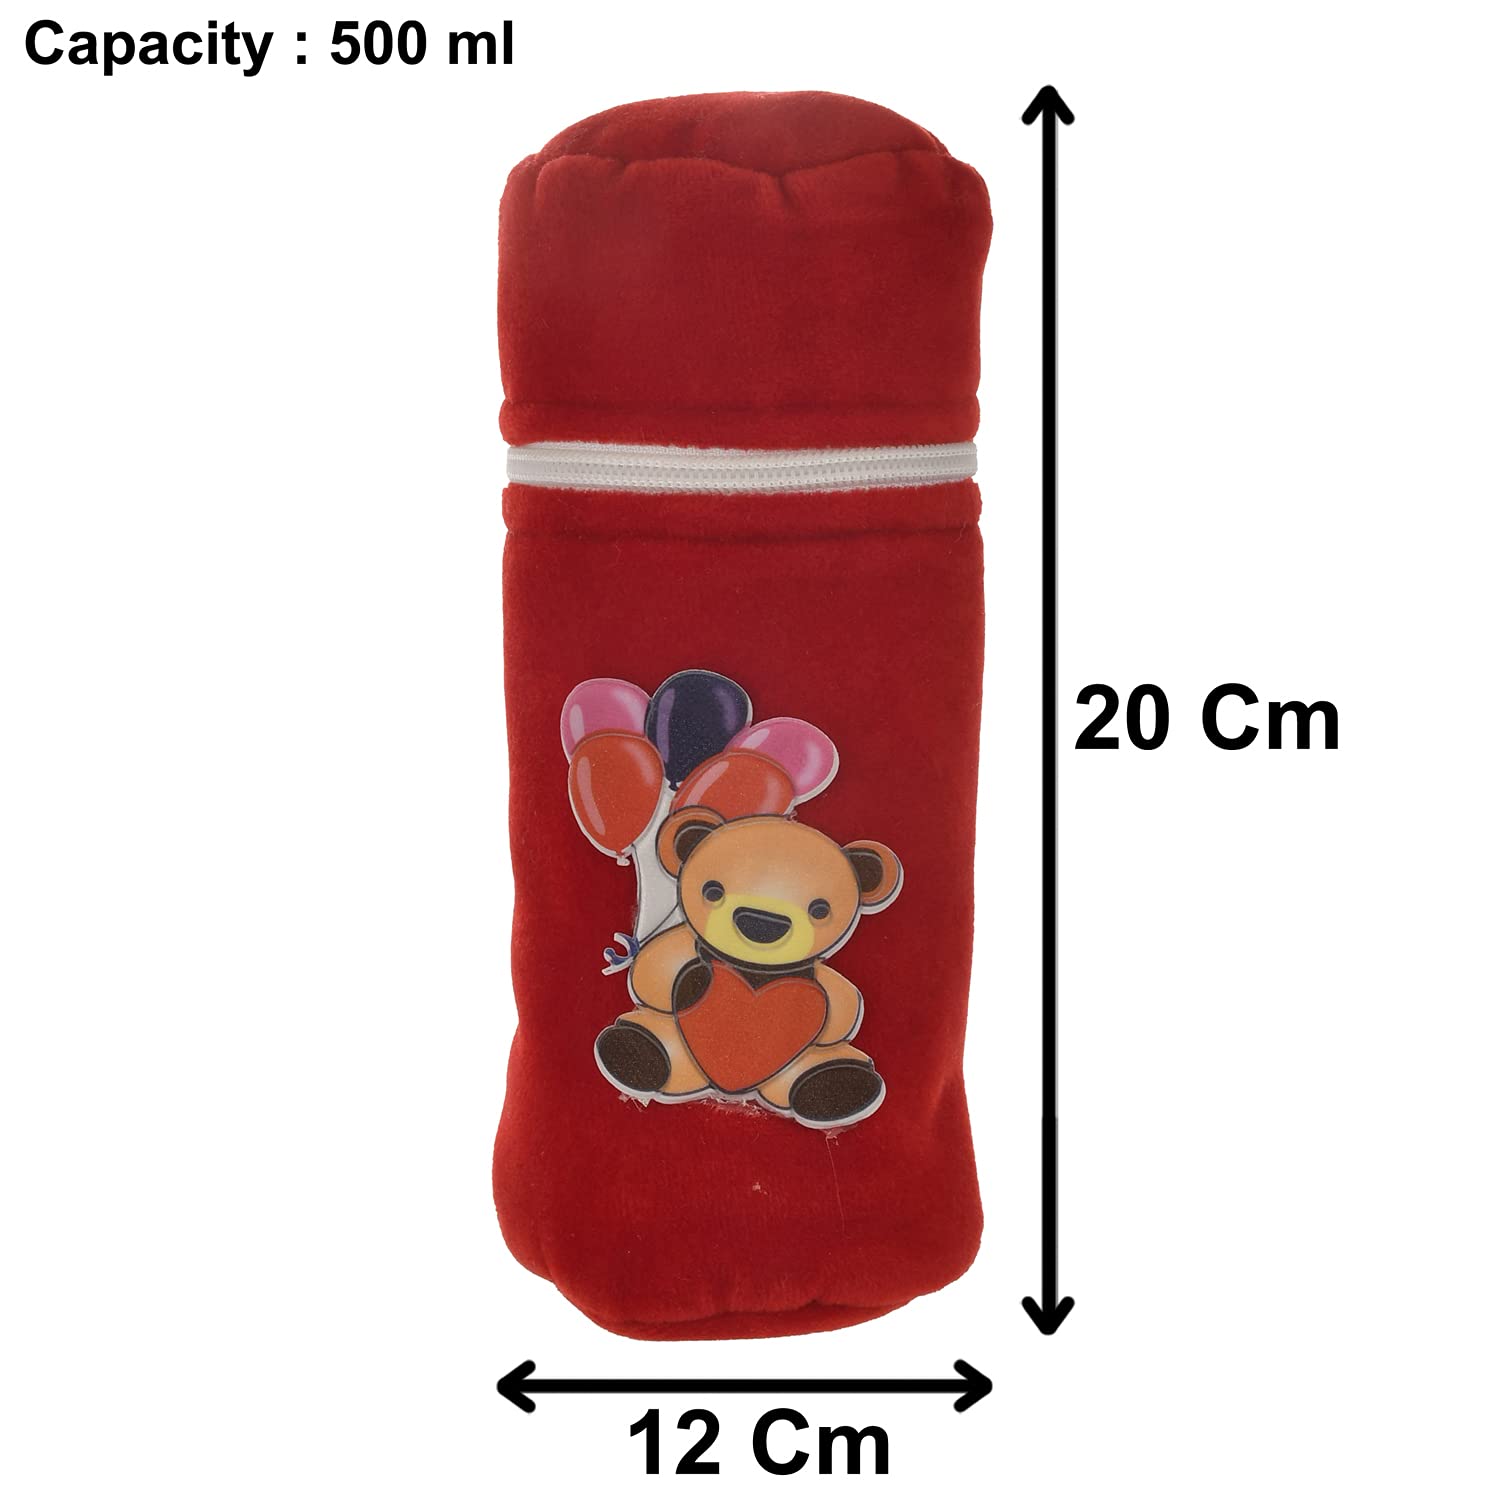 Heart Home Cartoon Printed Soft Velvet Stretchable Baby Feeding Bottle Cover With Easy to Hold Strap, Pack of 2 (Red)